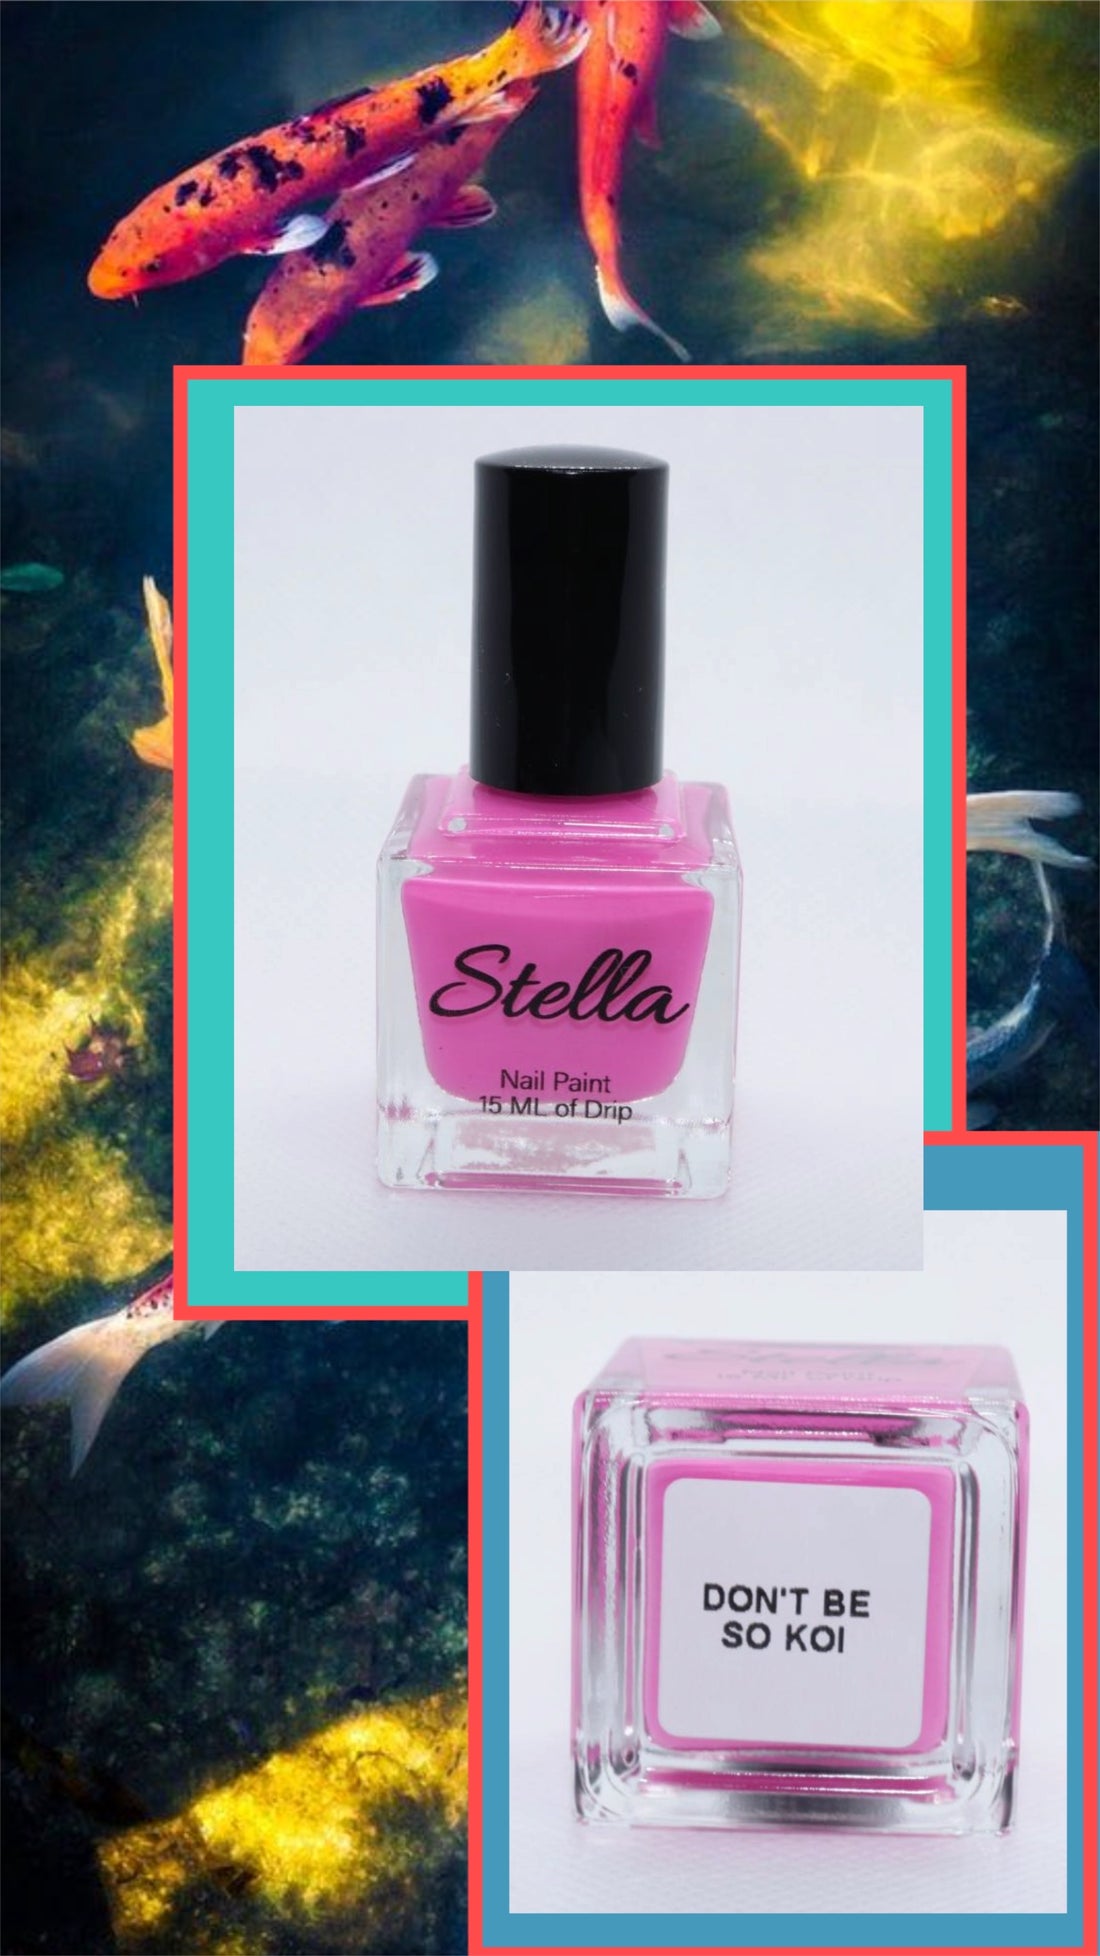 Stella Vegan Nail Polish: The Ethical and Beautiful Choice for Your Nails